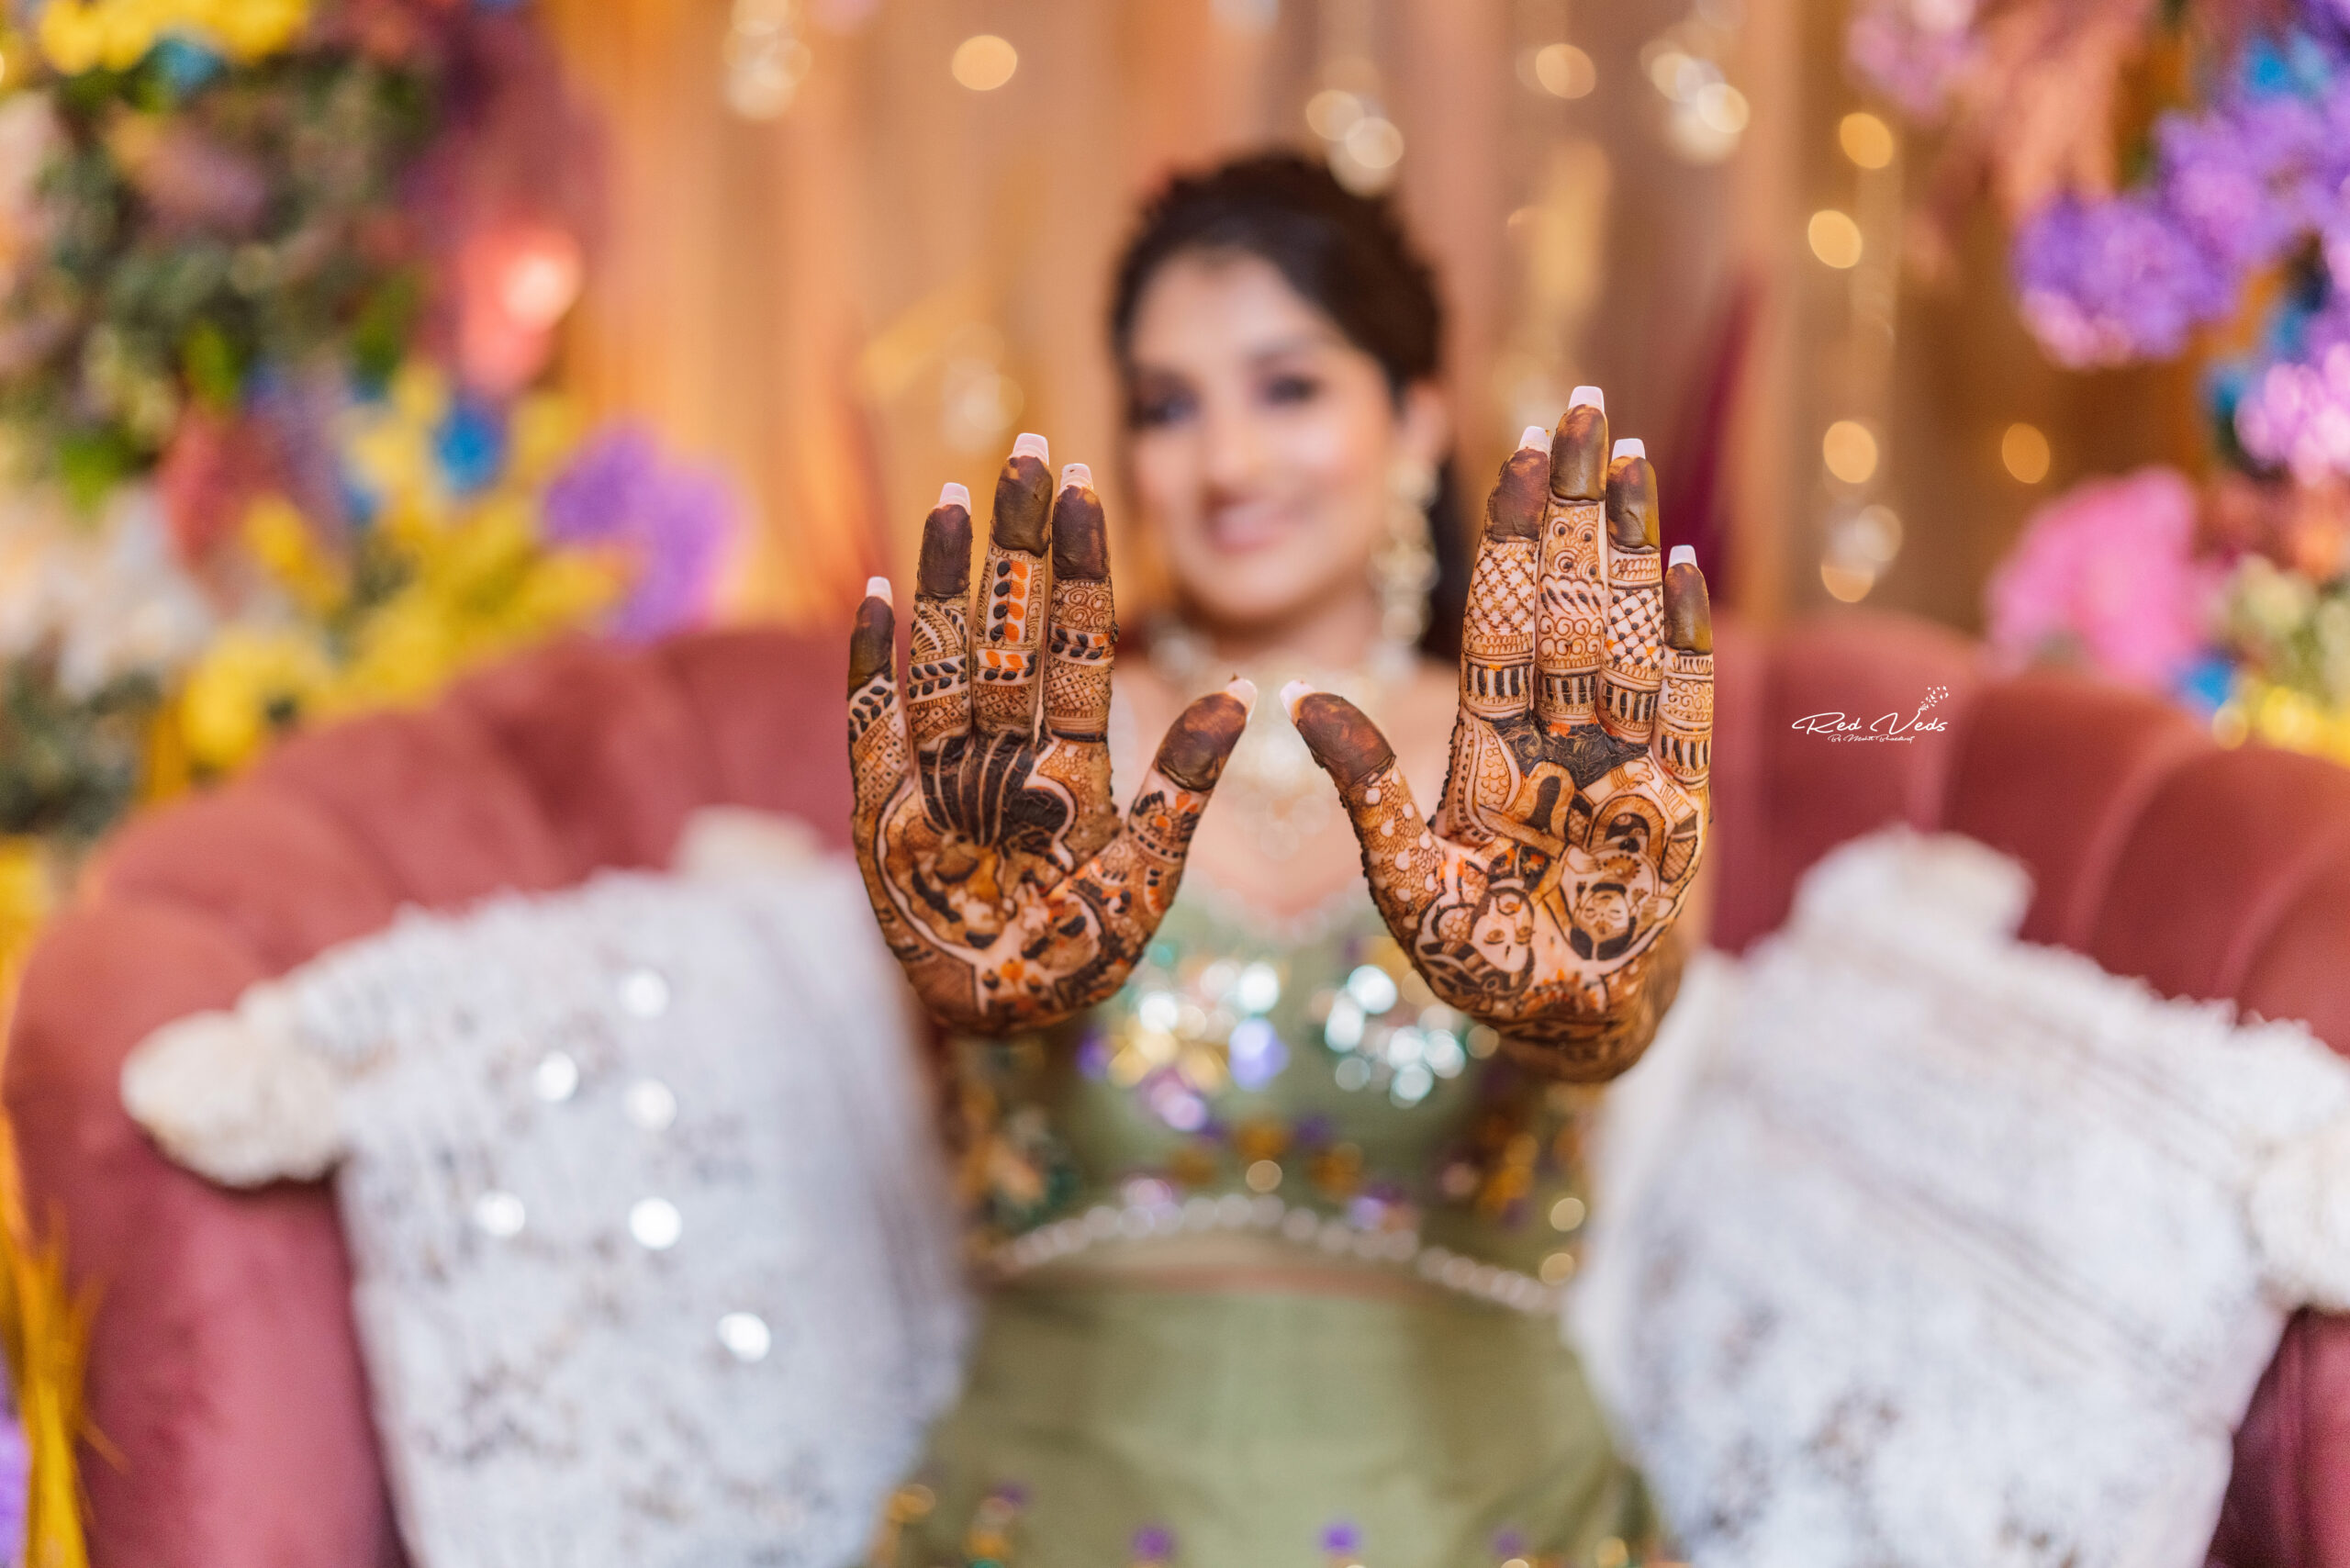 Do you know the significance of Mehendi in Indian Weddings? | by Rohini S  Murthy | Medium